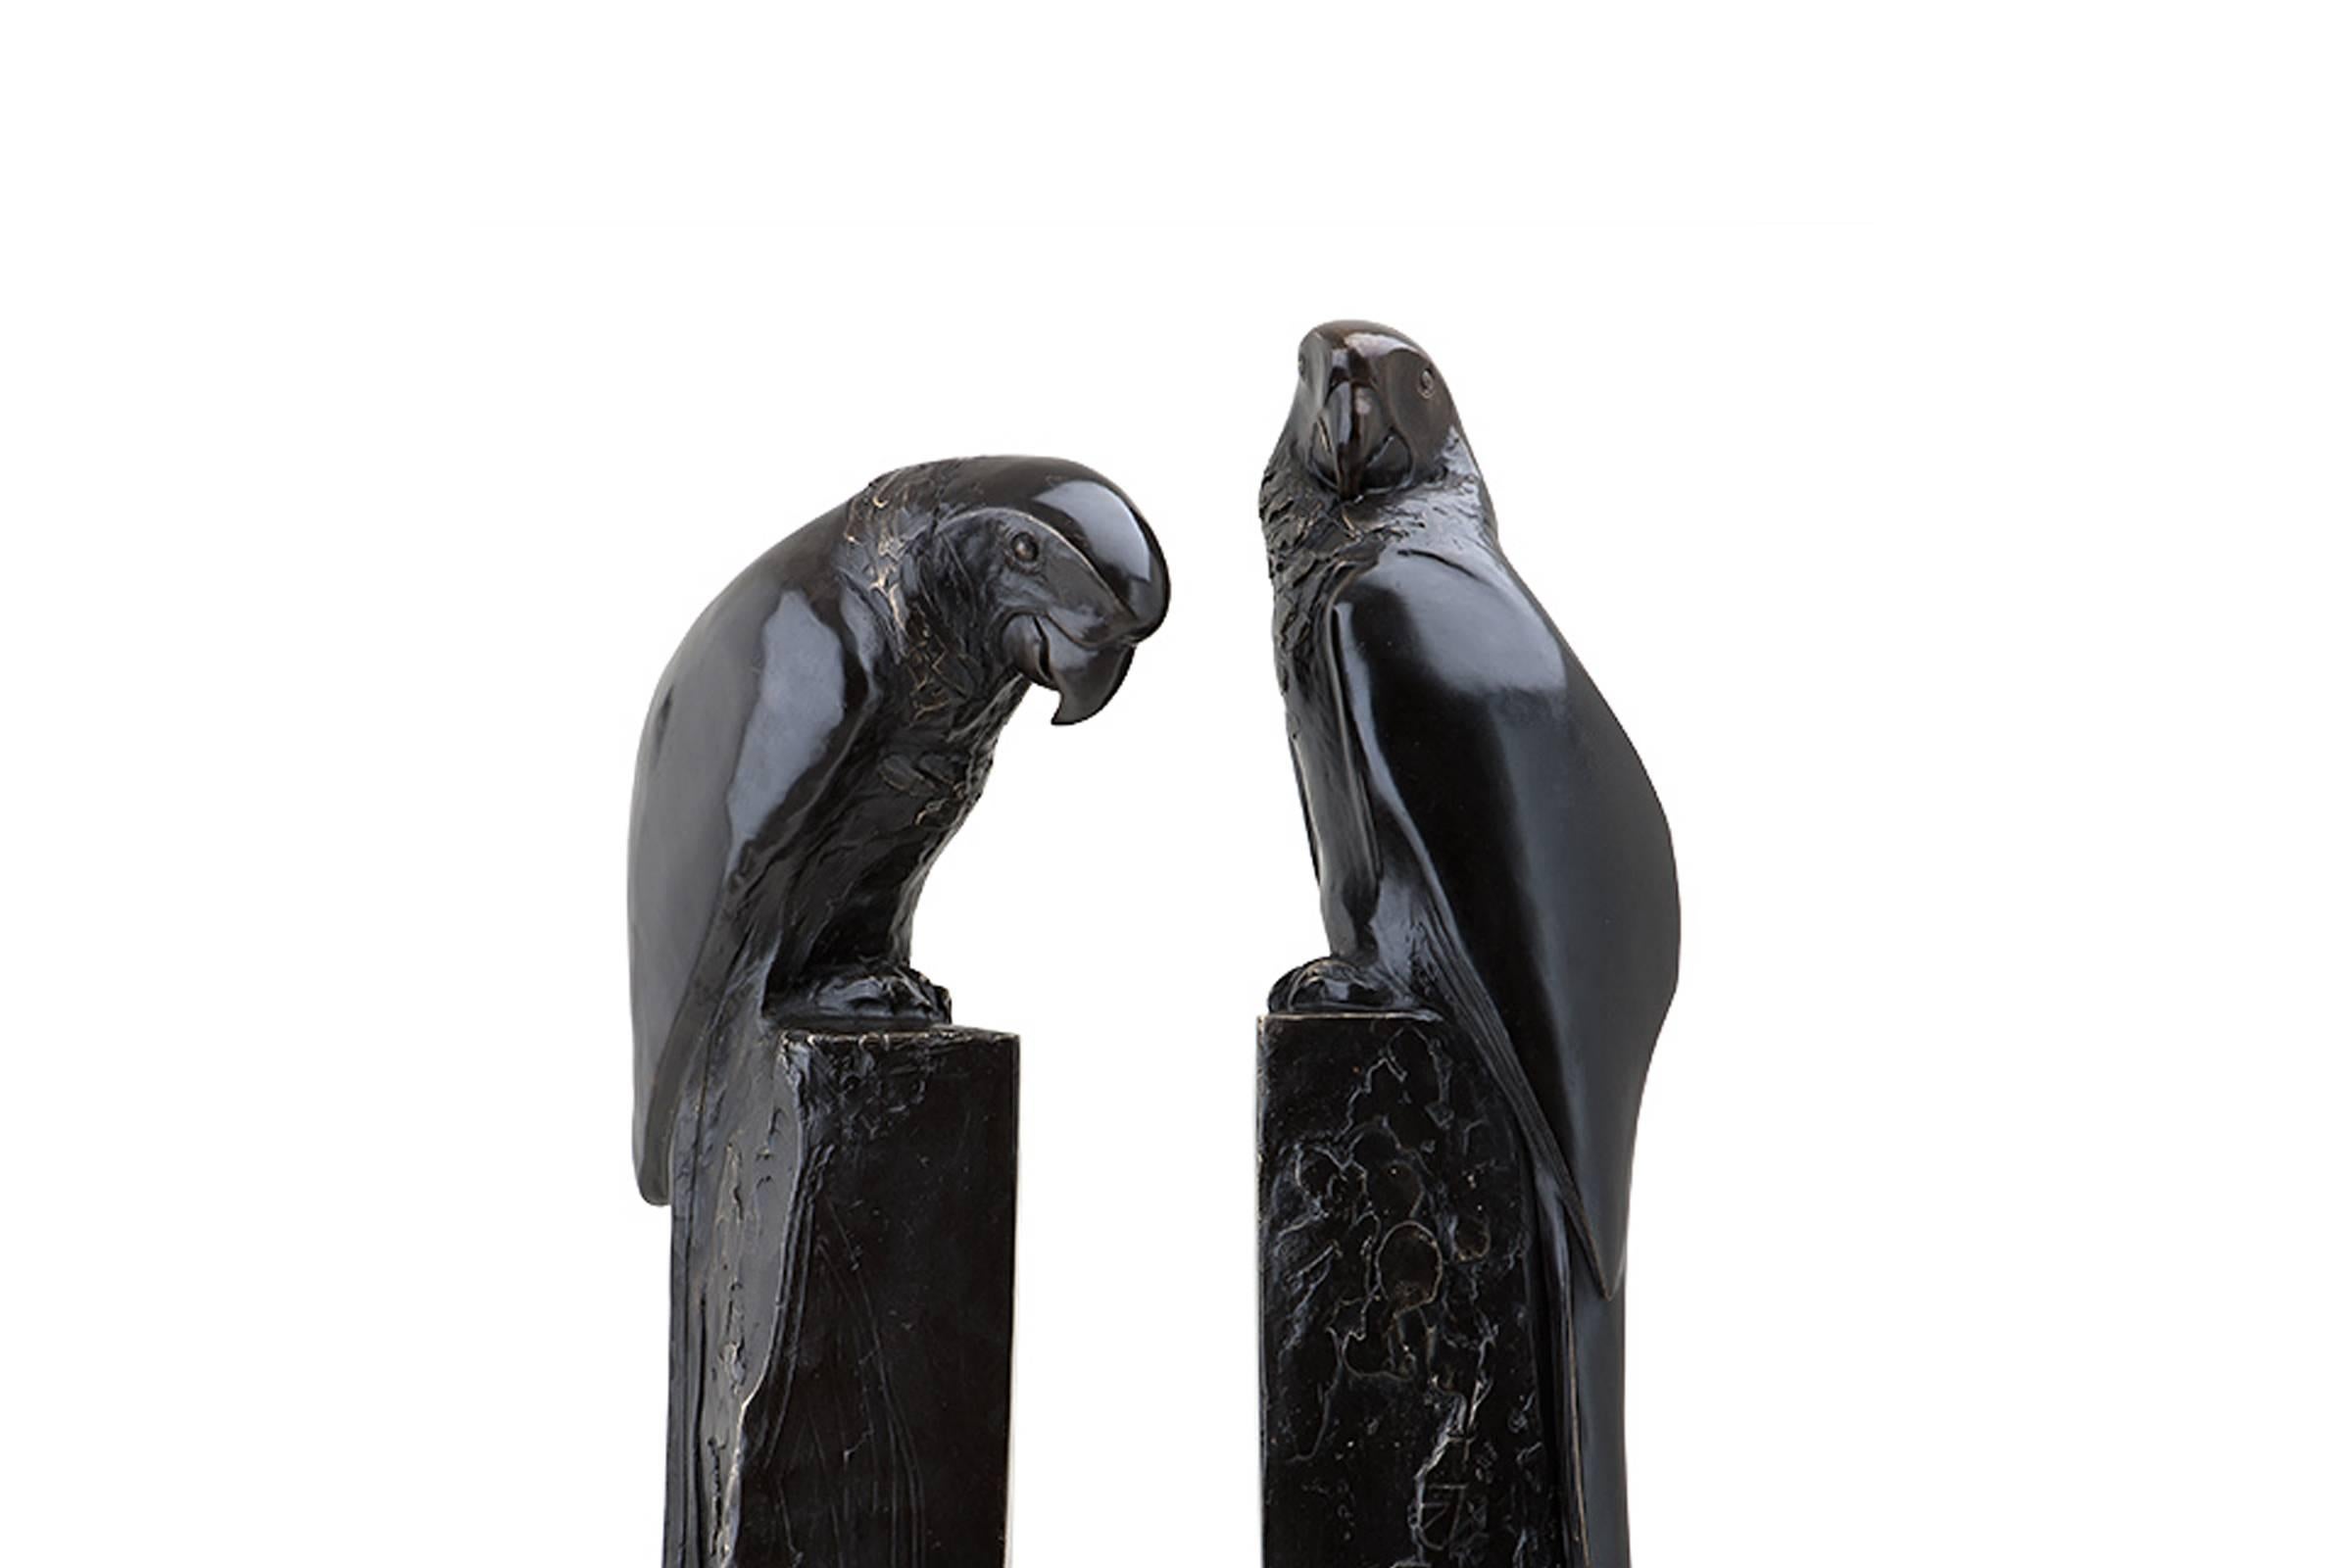 Contemporary Parrot Set of Two Book Ends in Solid Bronze Patina